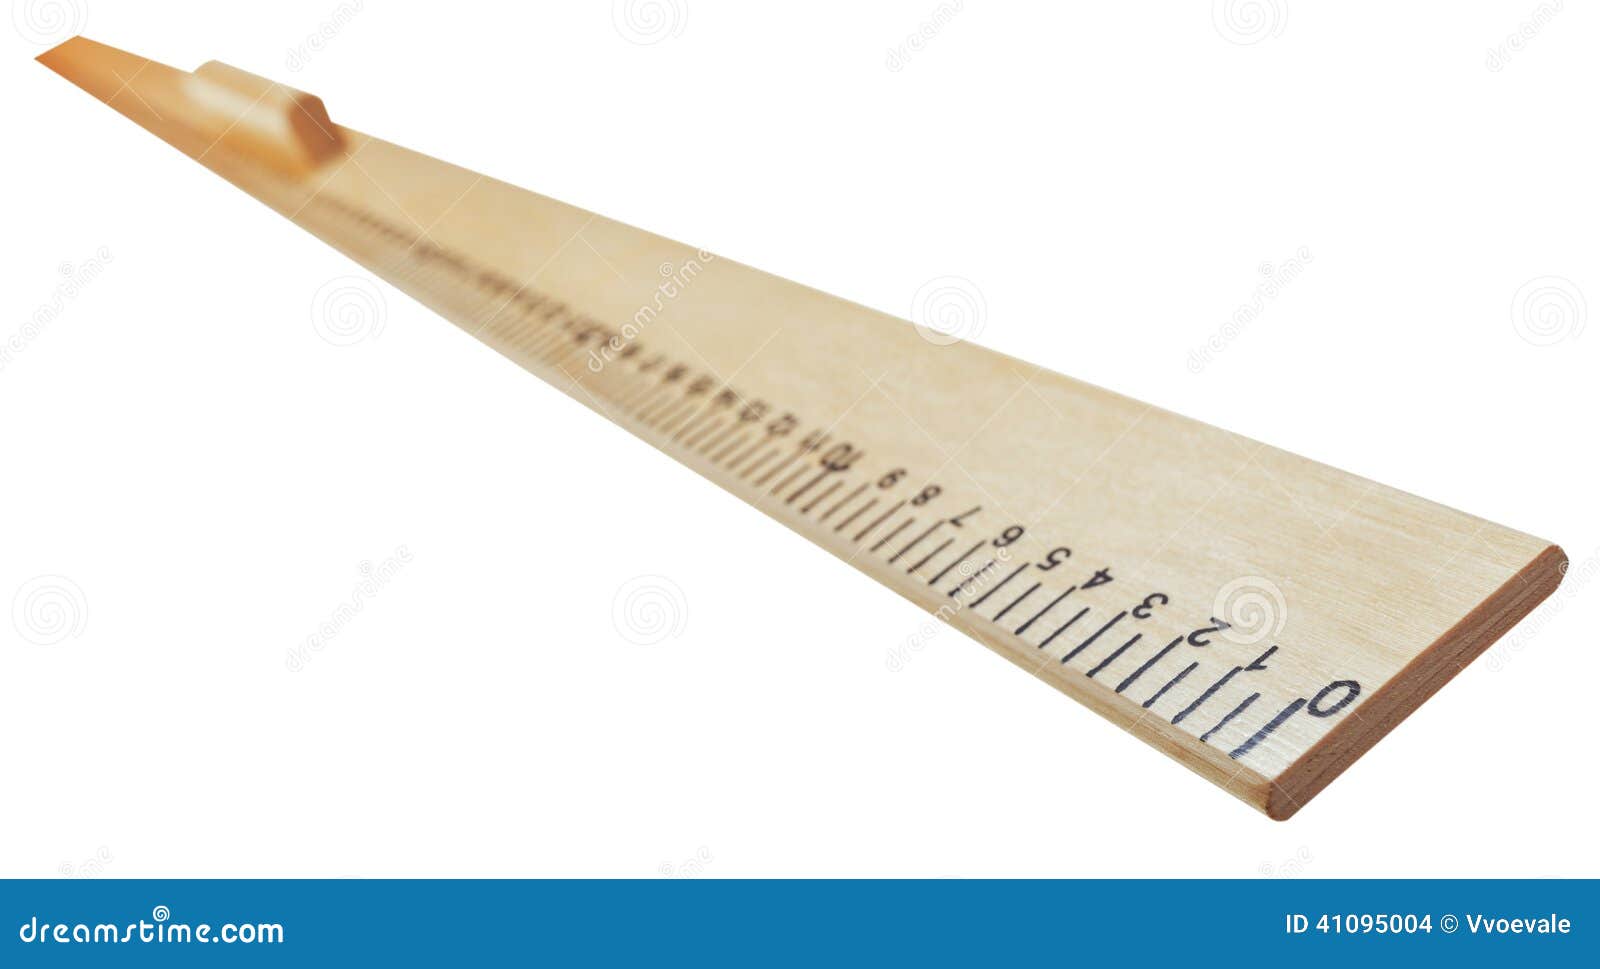 Drawing wooden meter ruler stock photo. Image of tool - 41095004